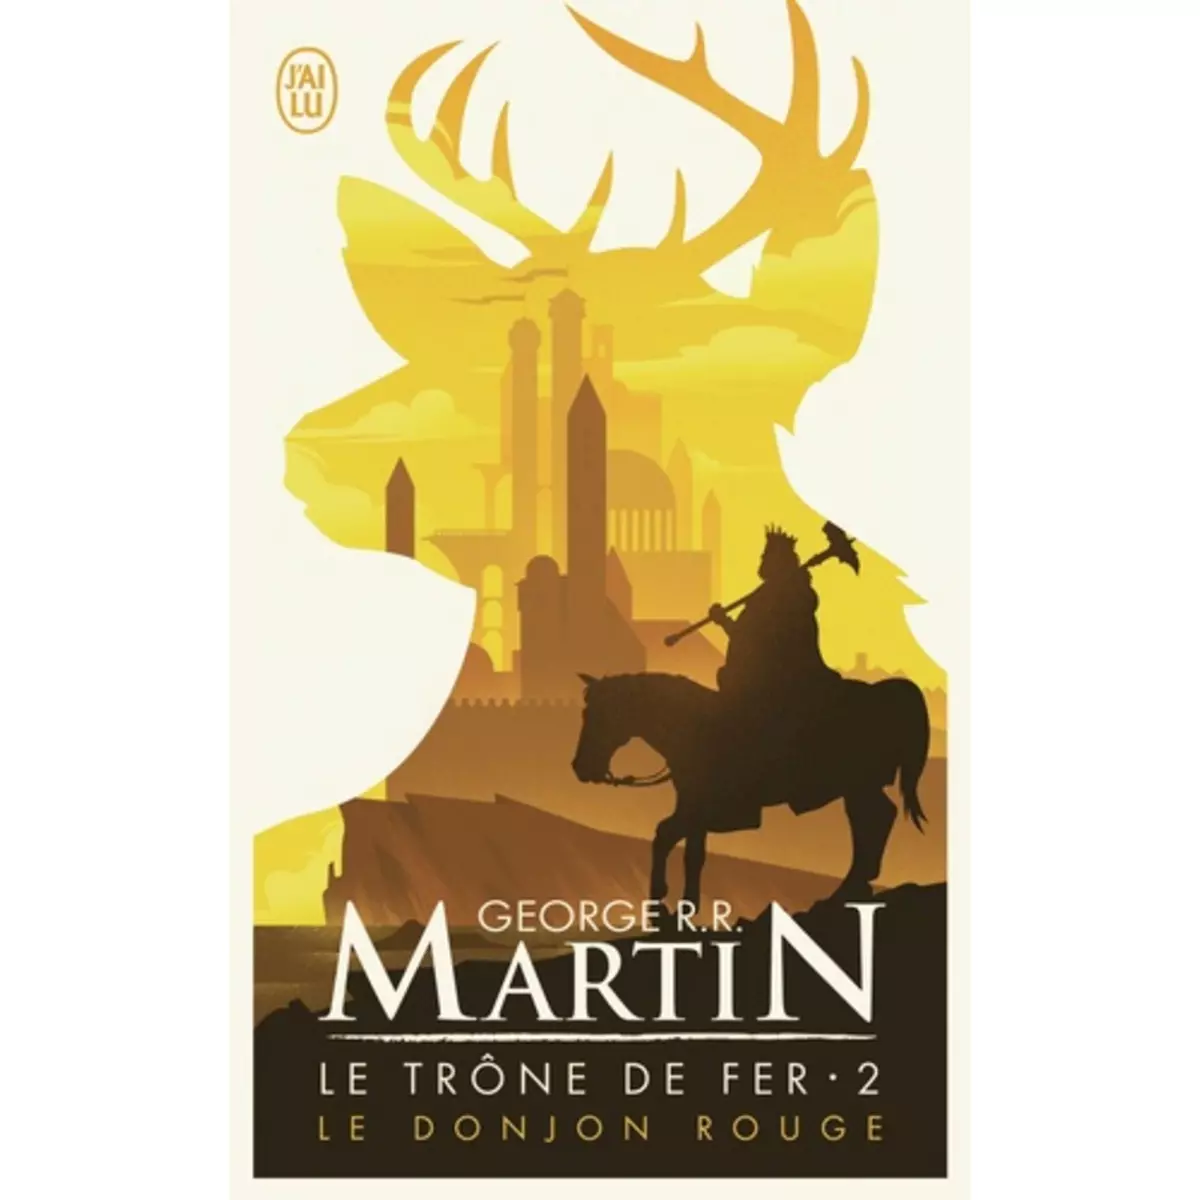  LE TRONE DE FER (A GAME OF THRONES) TOME 2 : LE DONJON ROUGE, Martin George R. R.